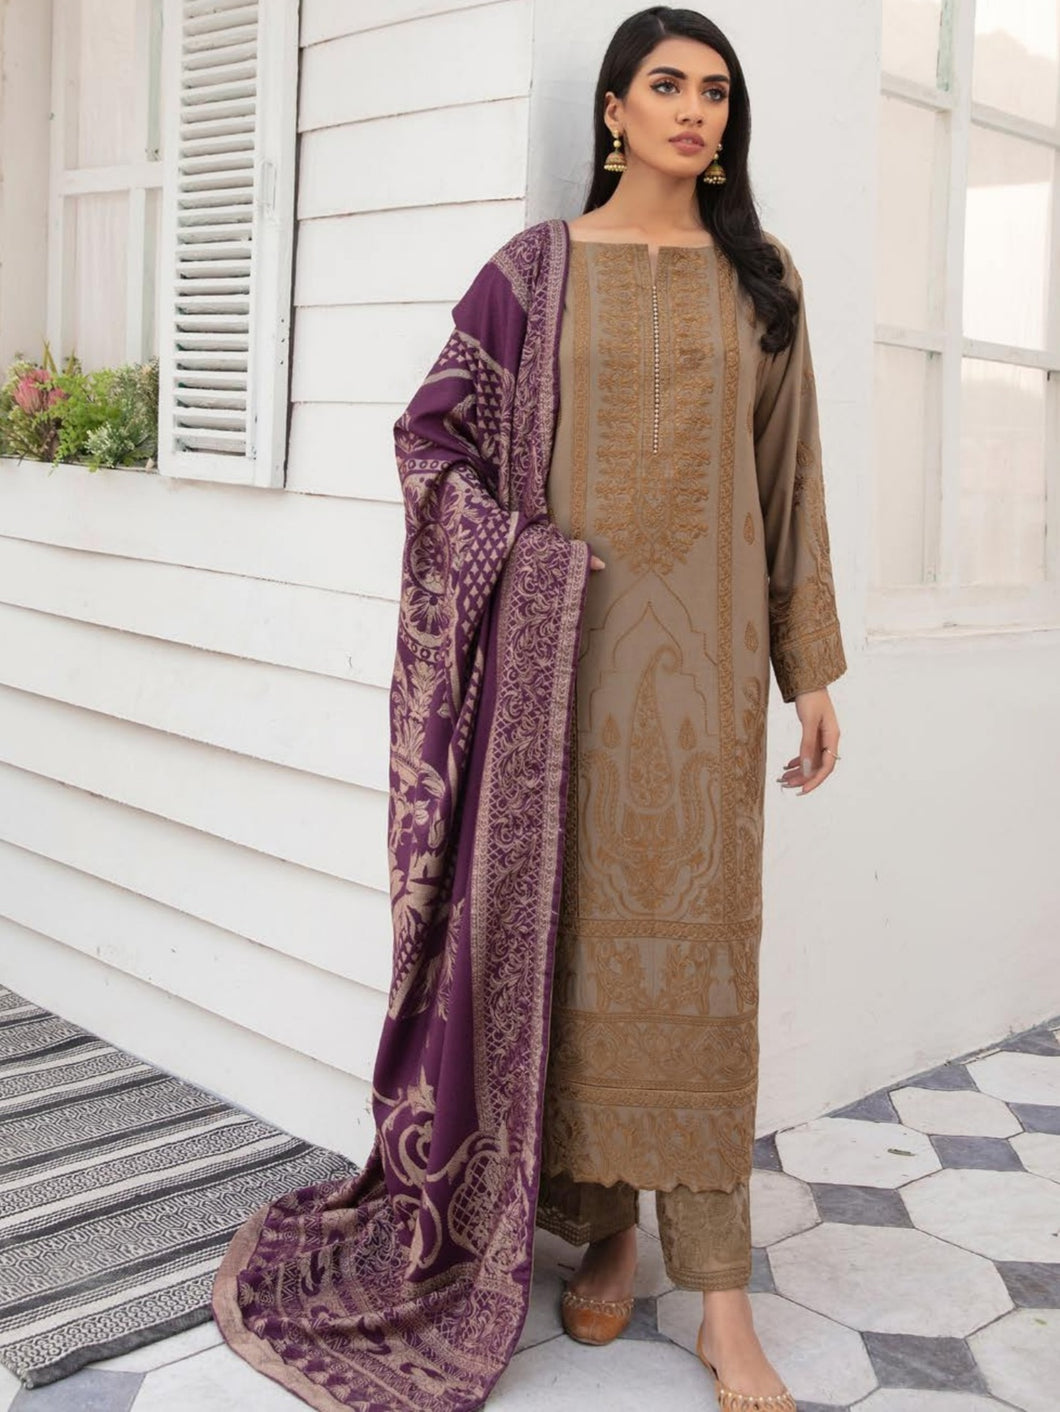 Johra Nafees Embroidered Marina Peach Winter Collection JR 629